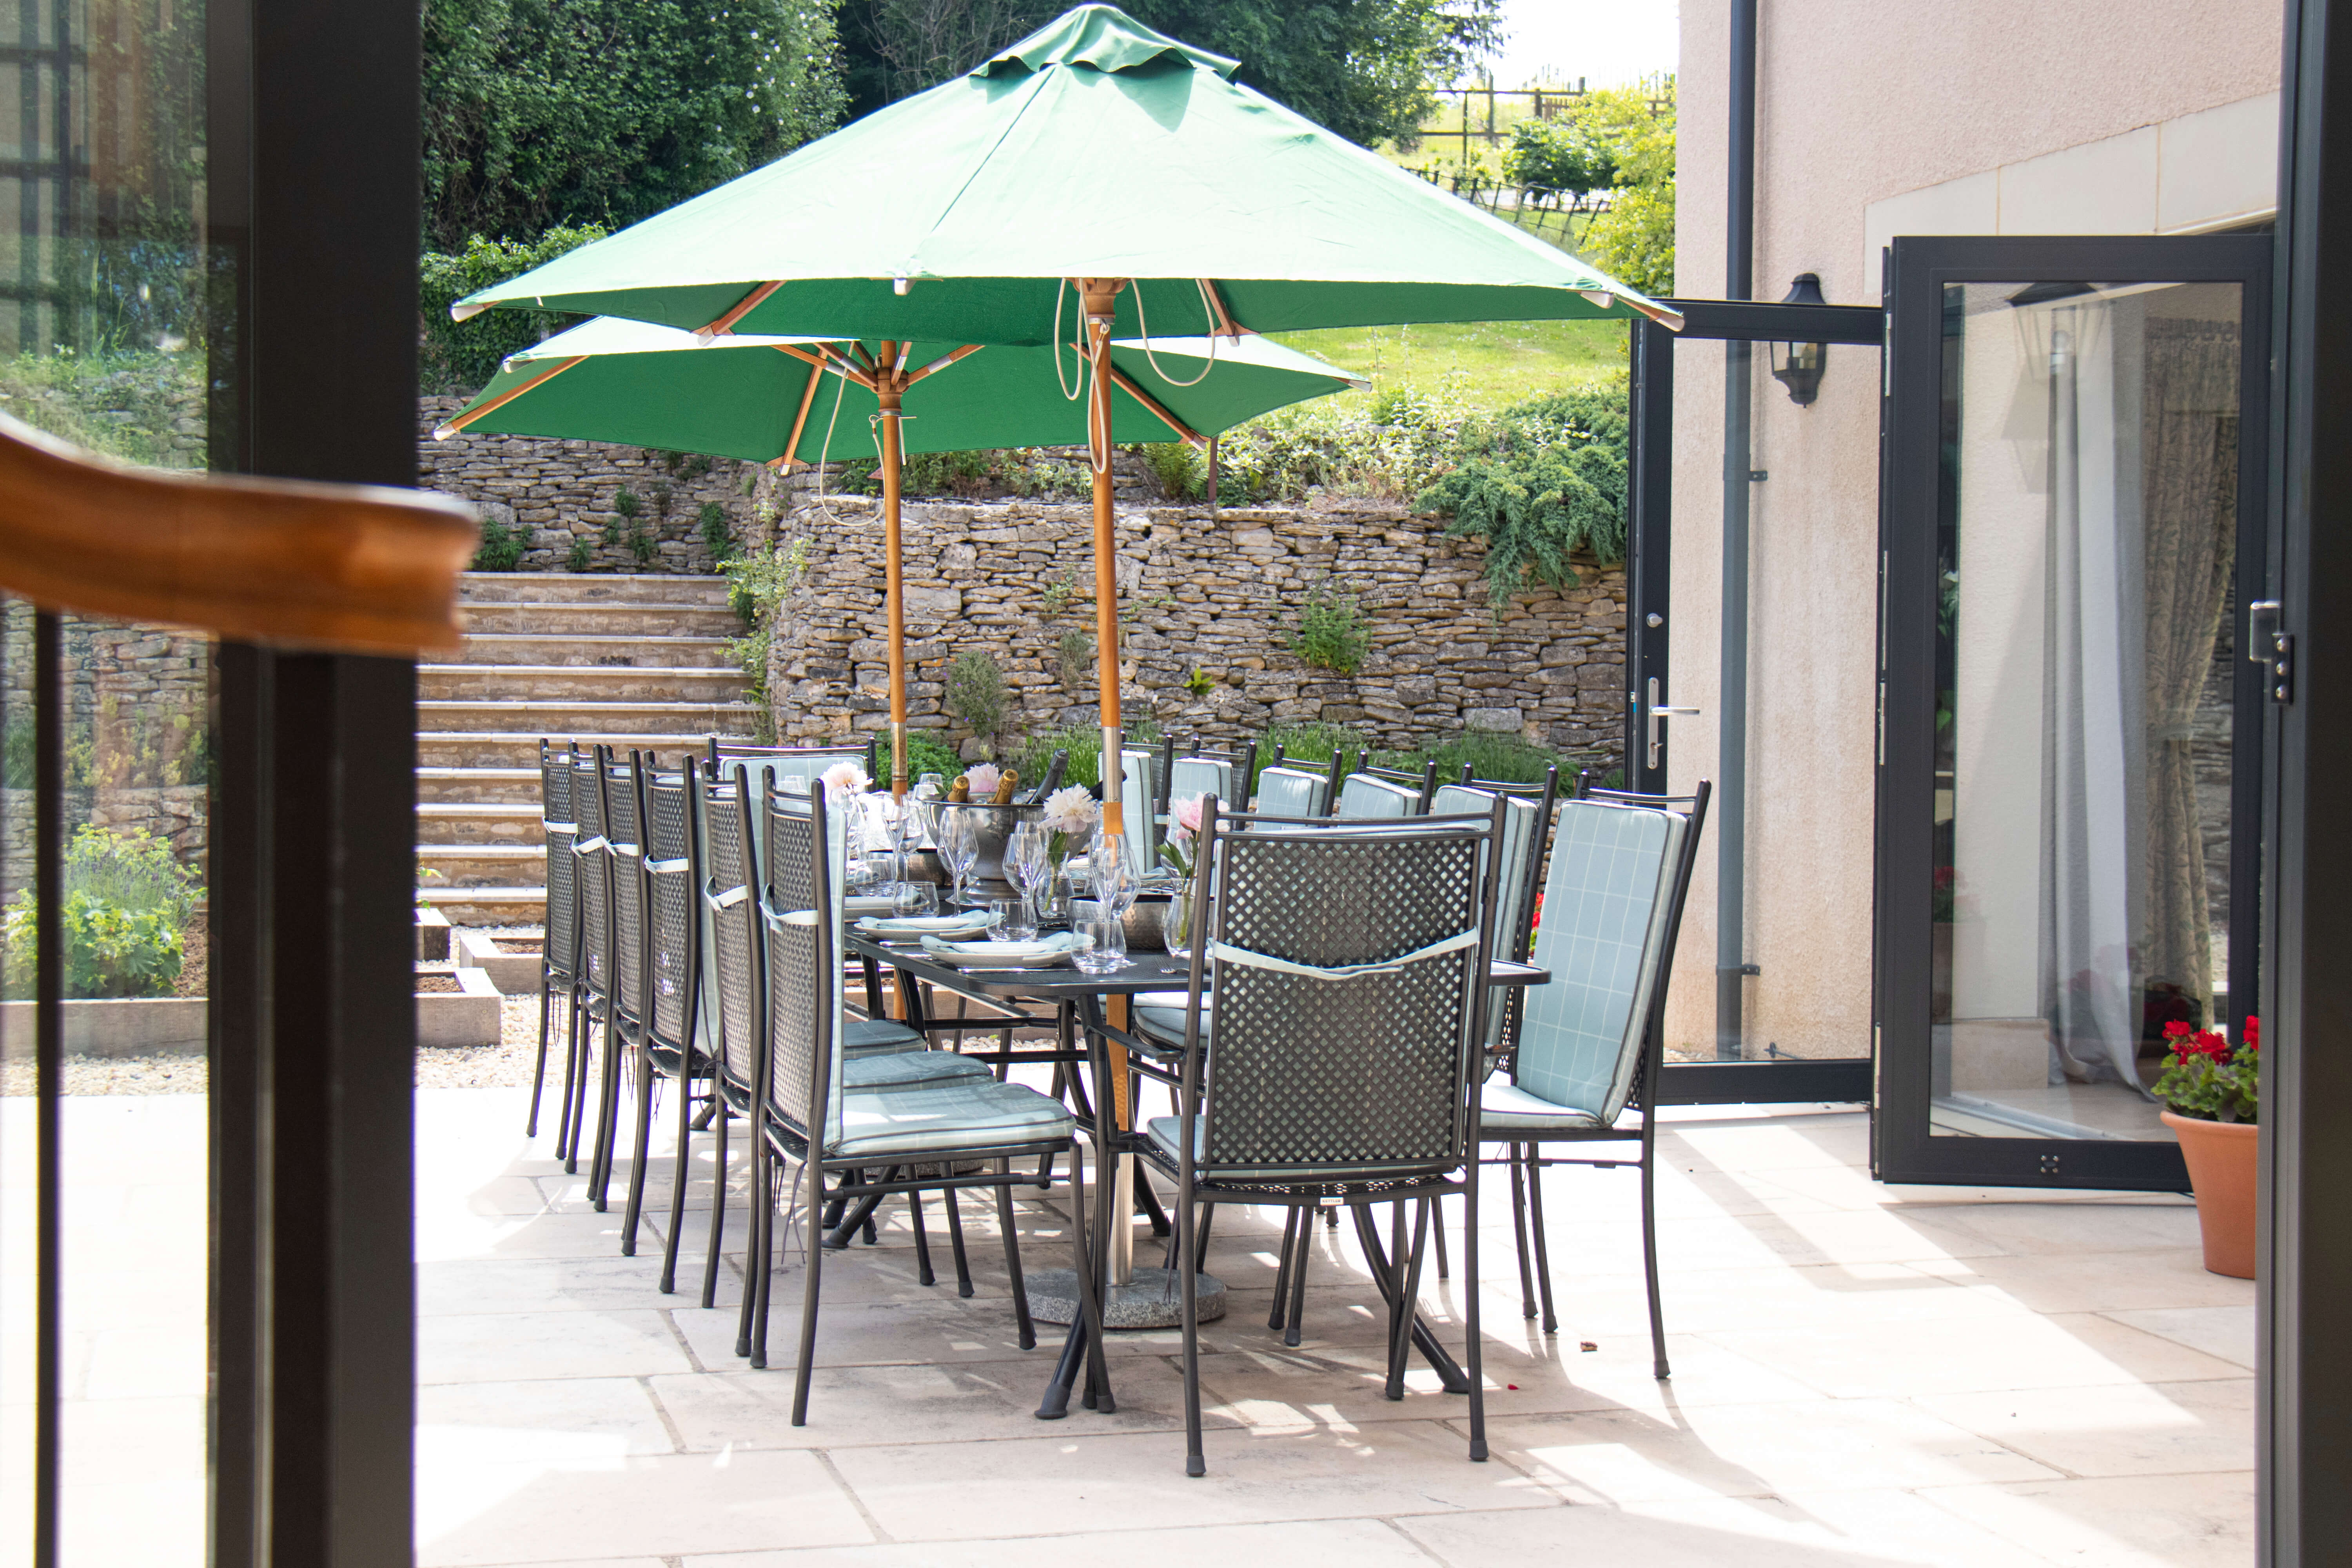 Woodchester Valley House - a lovely spot to share a meal together after a long day's work